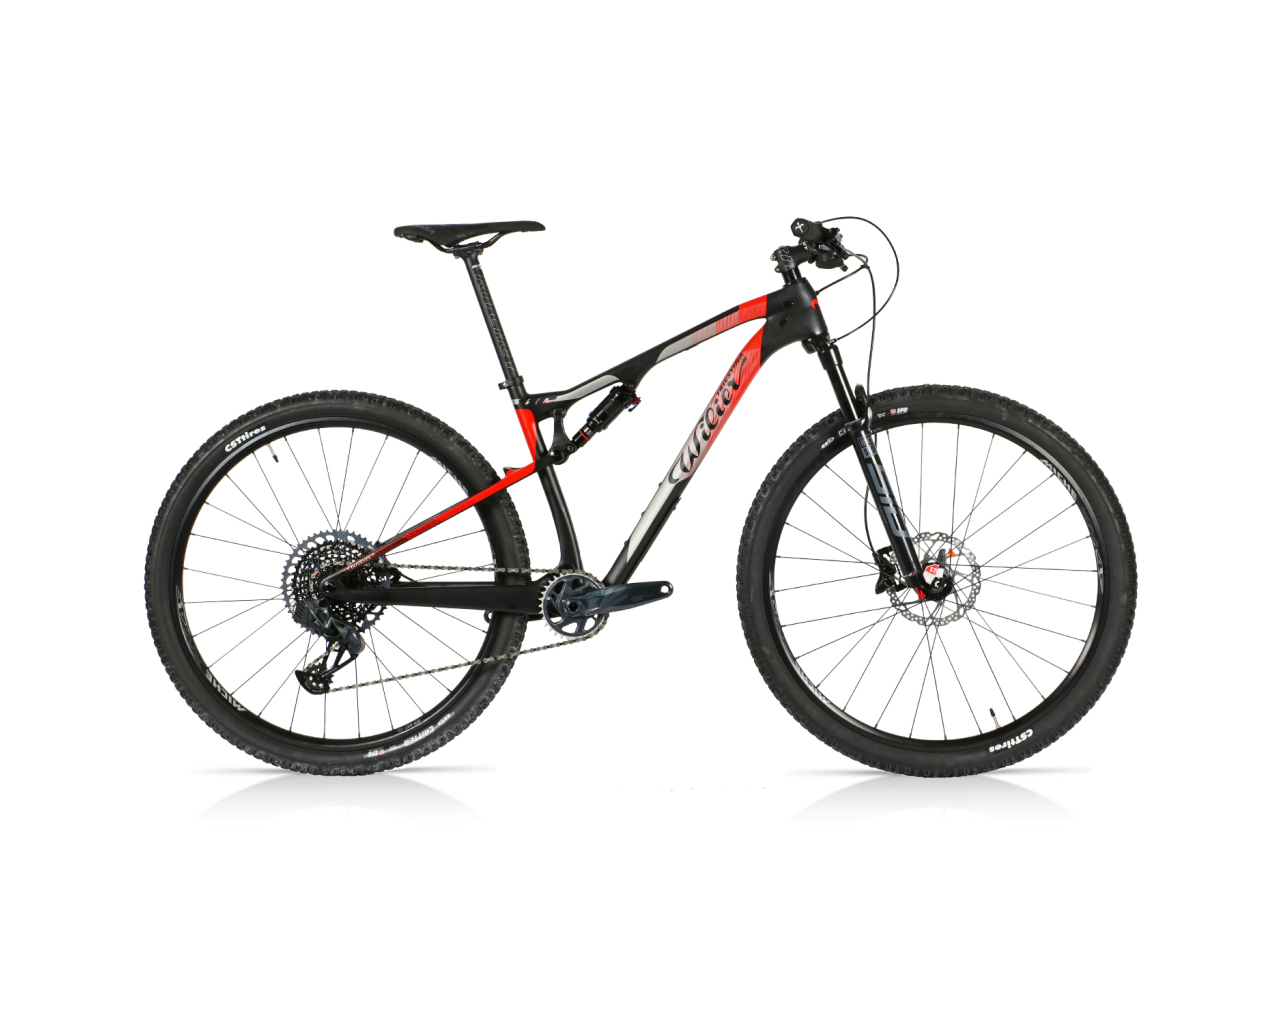 Wilier 110 FX GX AXS Full Suspension Mountain Bike - 2021 | Merlin Cycles